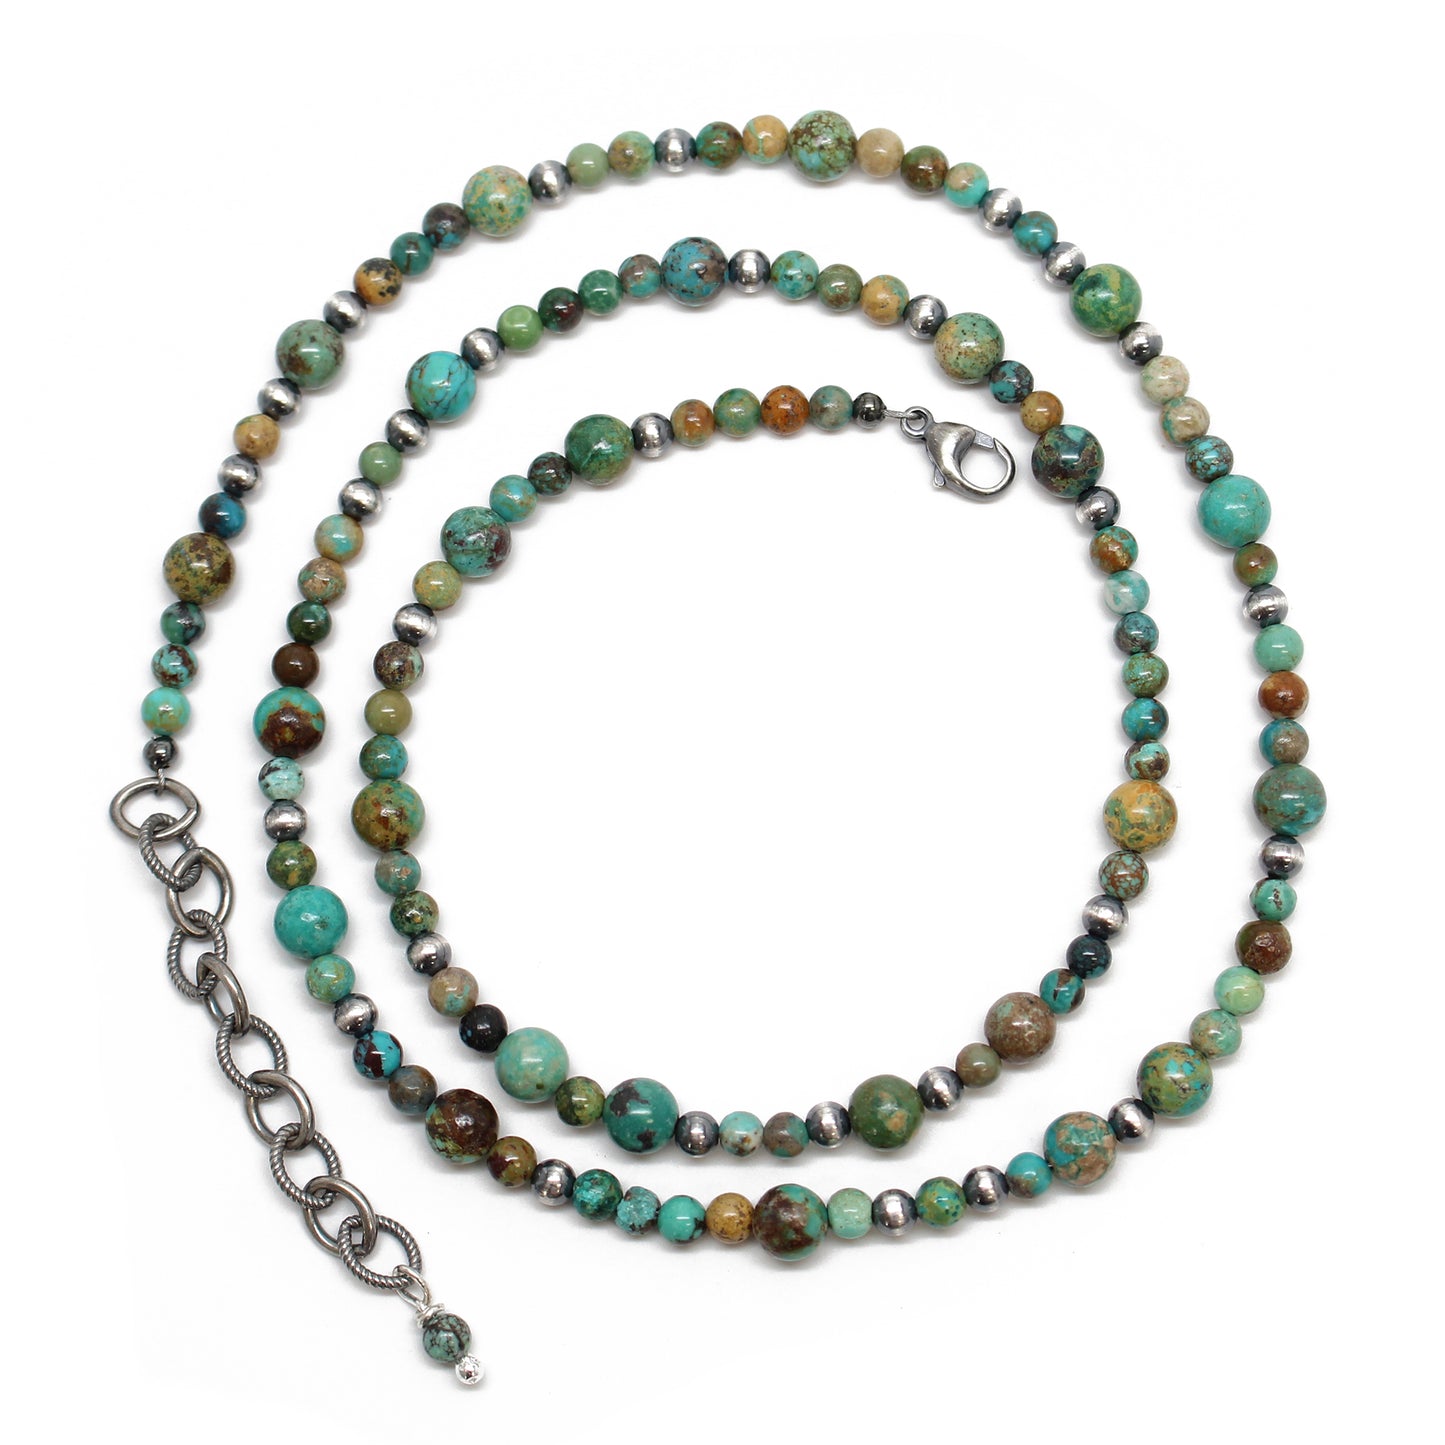 Hubei Turquoise and Antiqued Sterling Silver Bead Necklace